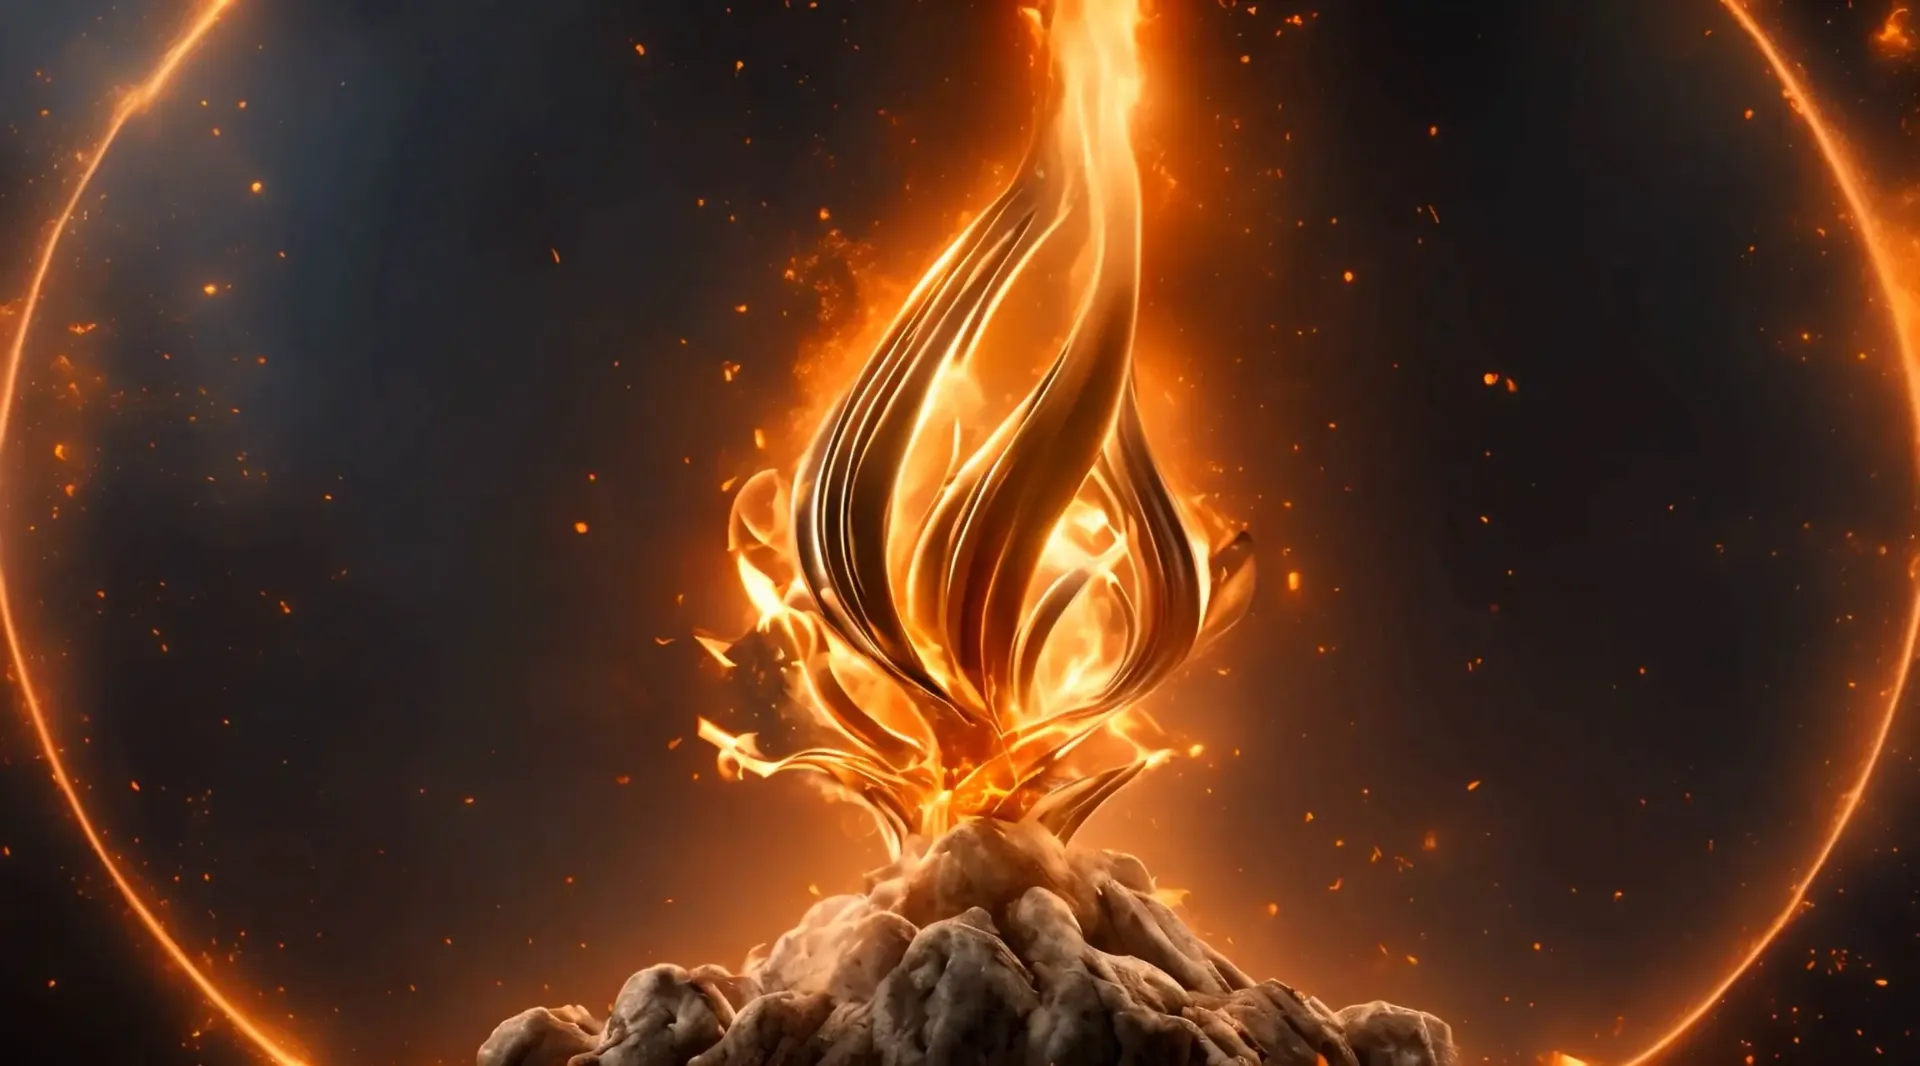 Blazing Flame with Halo Effect Background